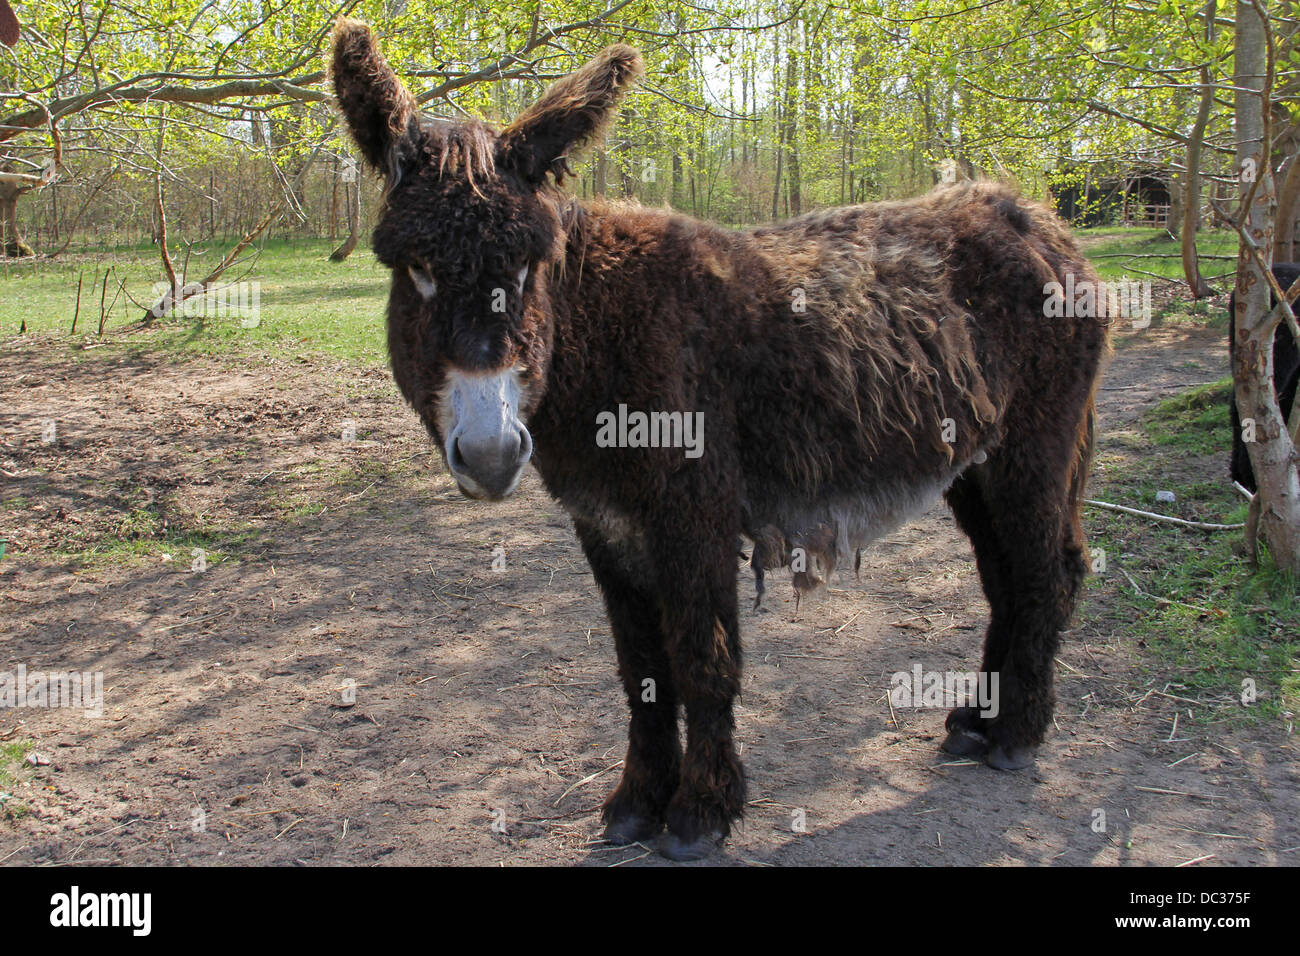 Zottig High Resolution Stock Photography and Images - Alamy